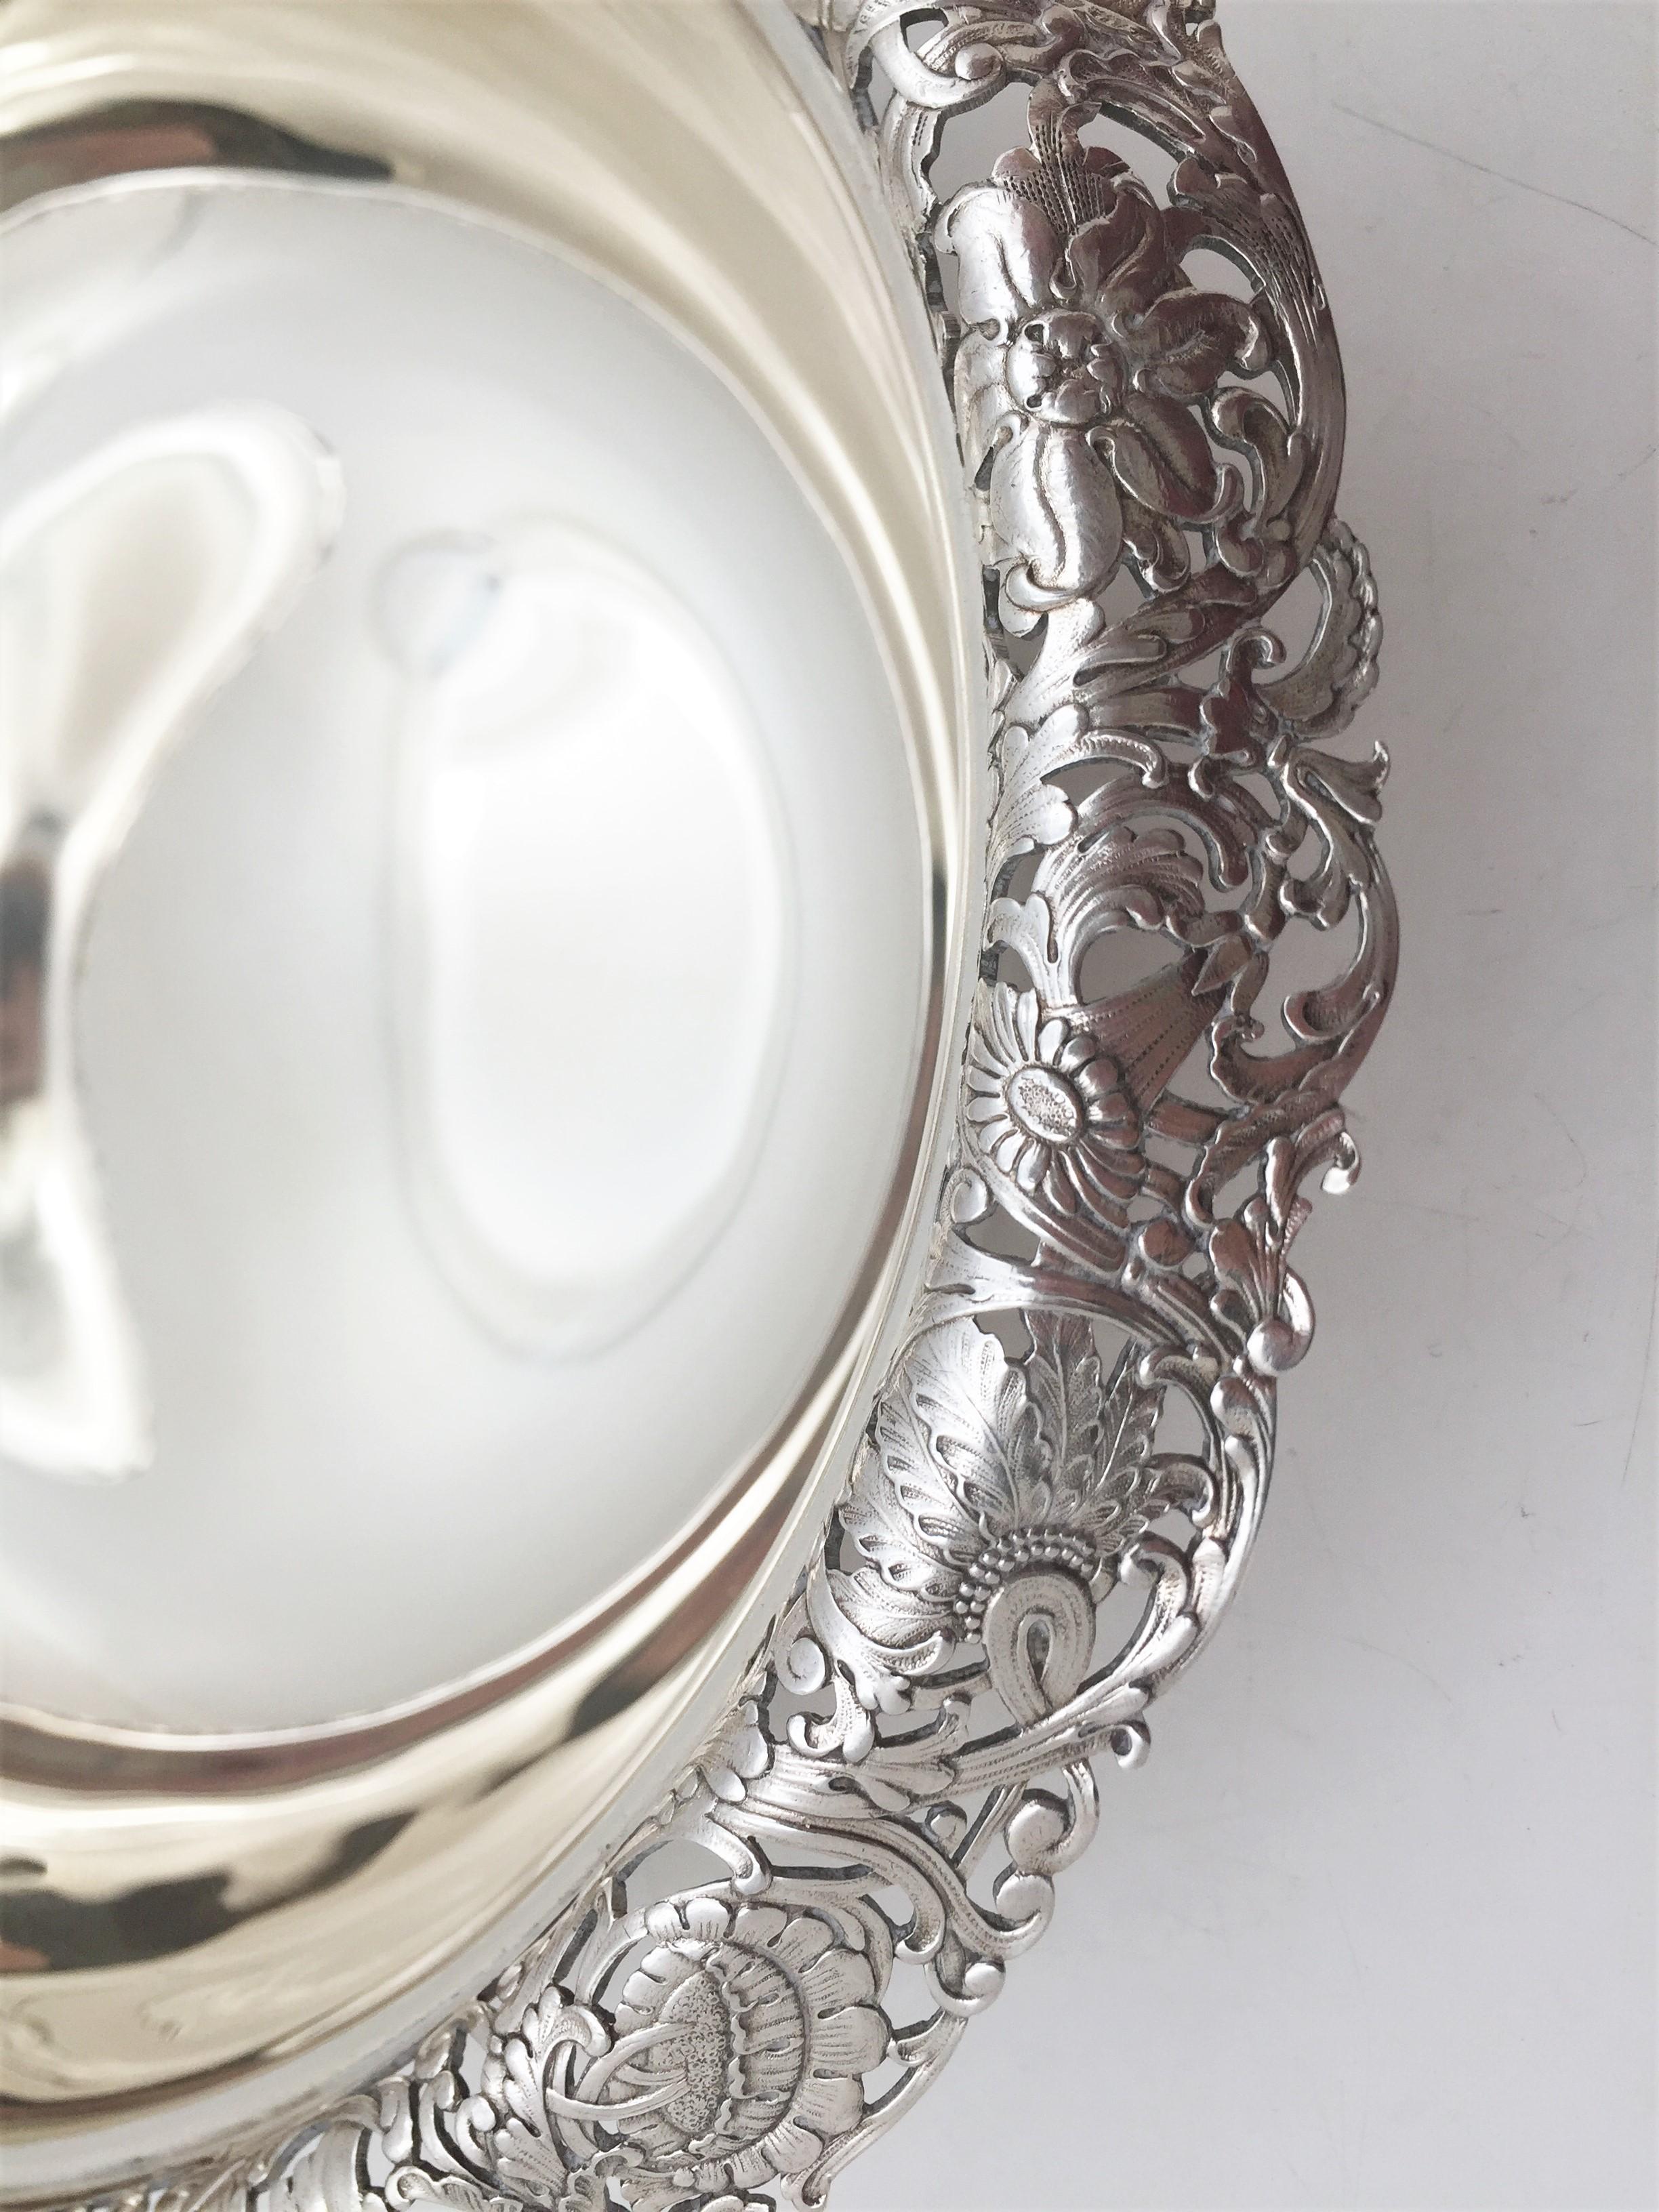 Late 19th Century Tiffany & Co. Sterling Silver 1890s Bowl in Art Nouveau Style For Sale